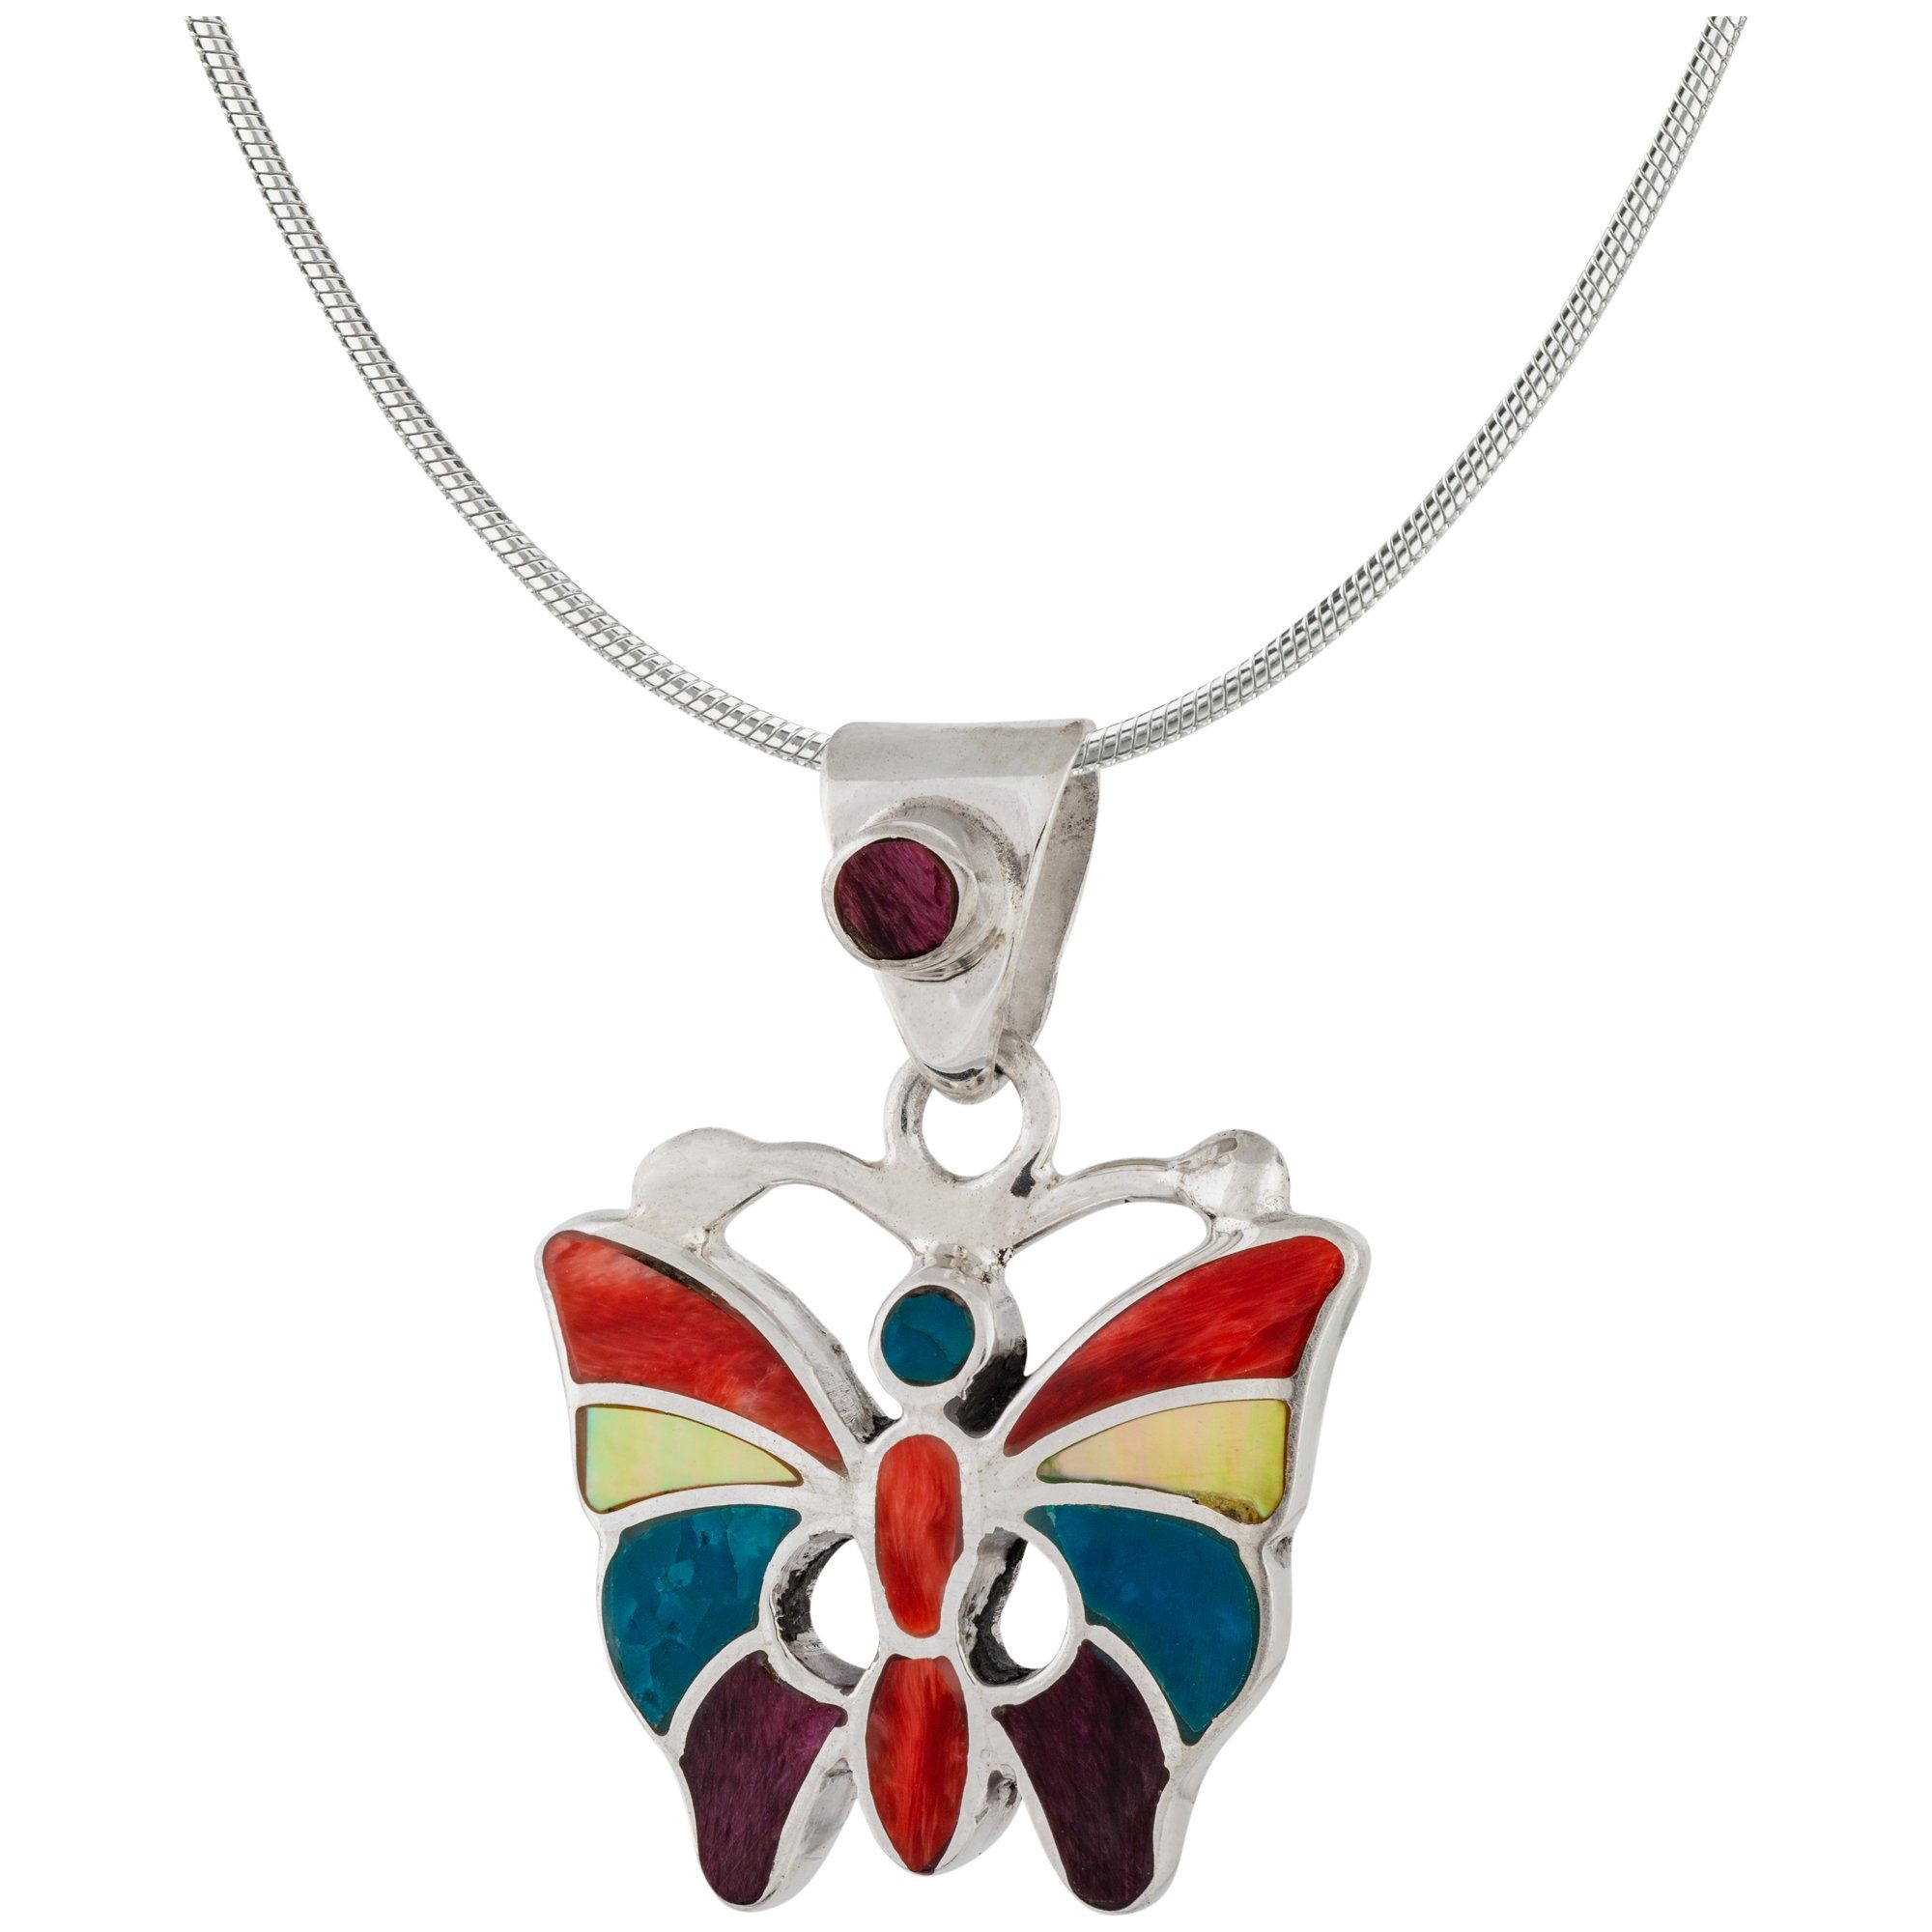 Earth's Splendor Gemstone & Sterling Necklace - Butterfly - With Snake Chain